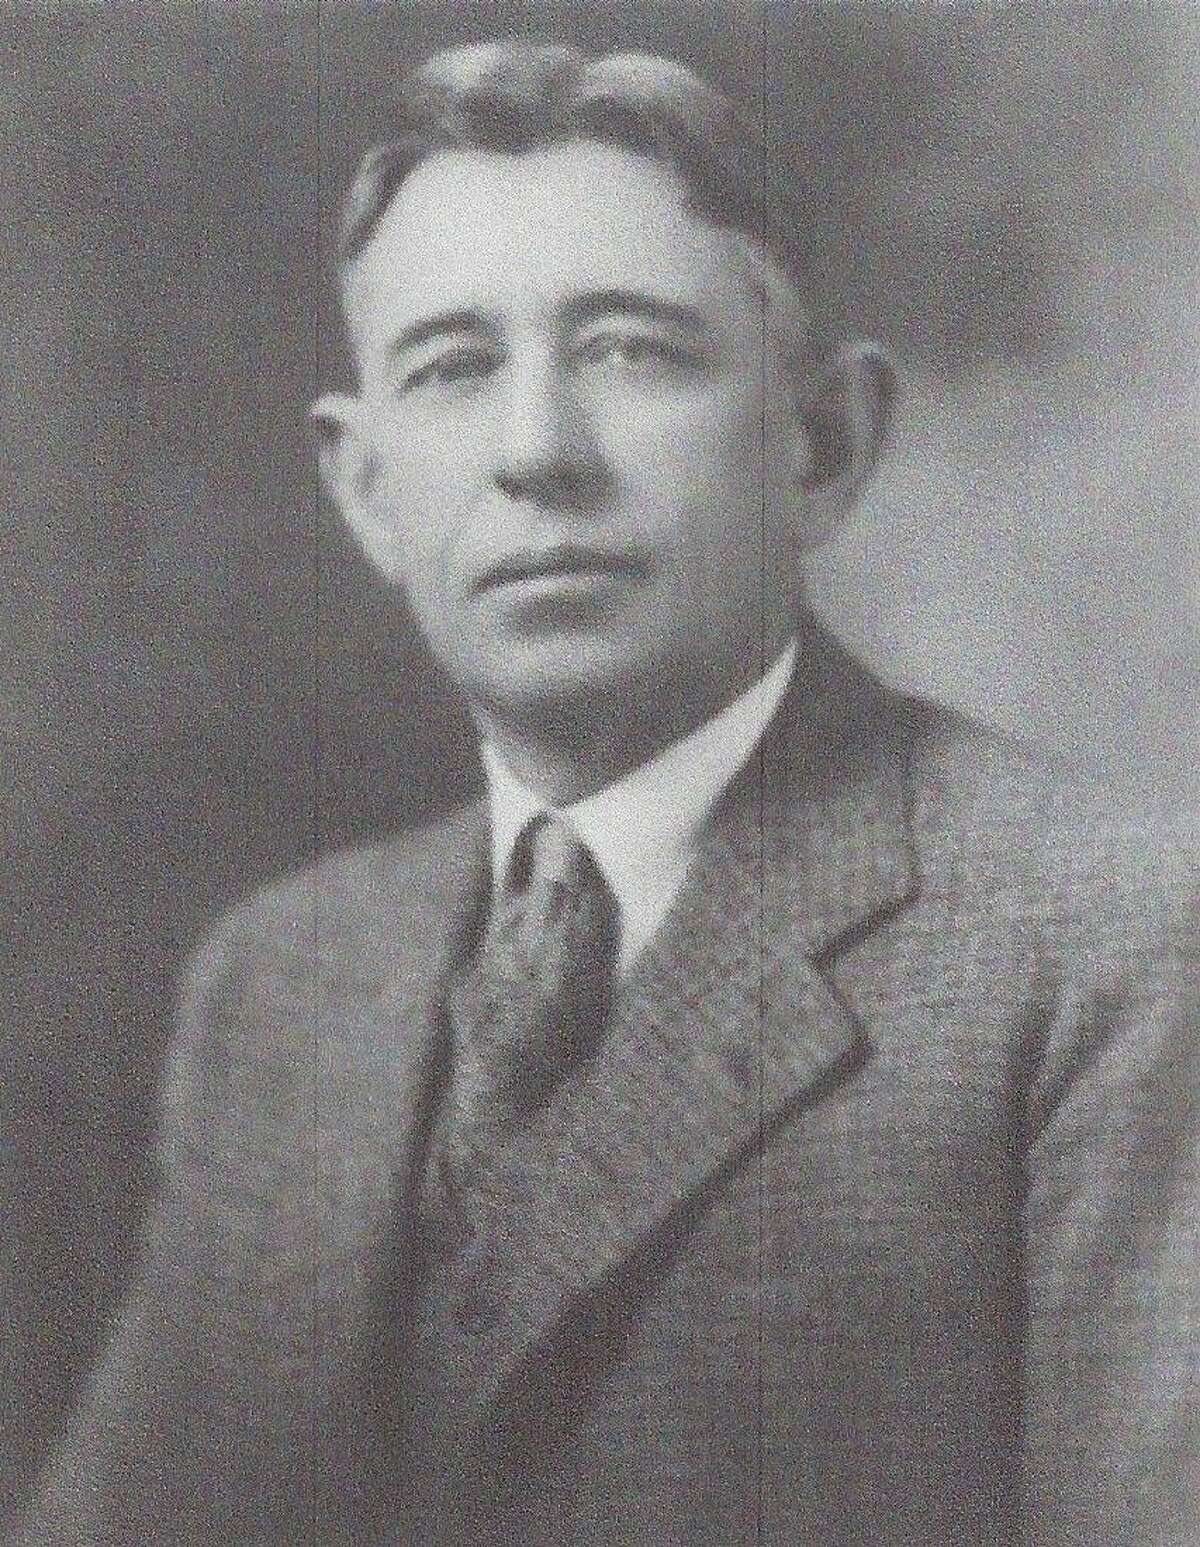 Dr. Thomas S. Falvey was one of 16 children and was perhaps the most respected doctor and surgeon in Conroe during the first half of the 20th century.